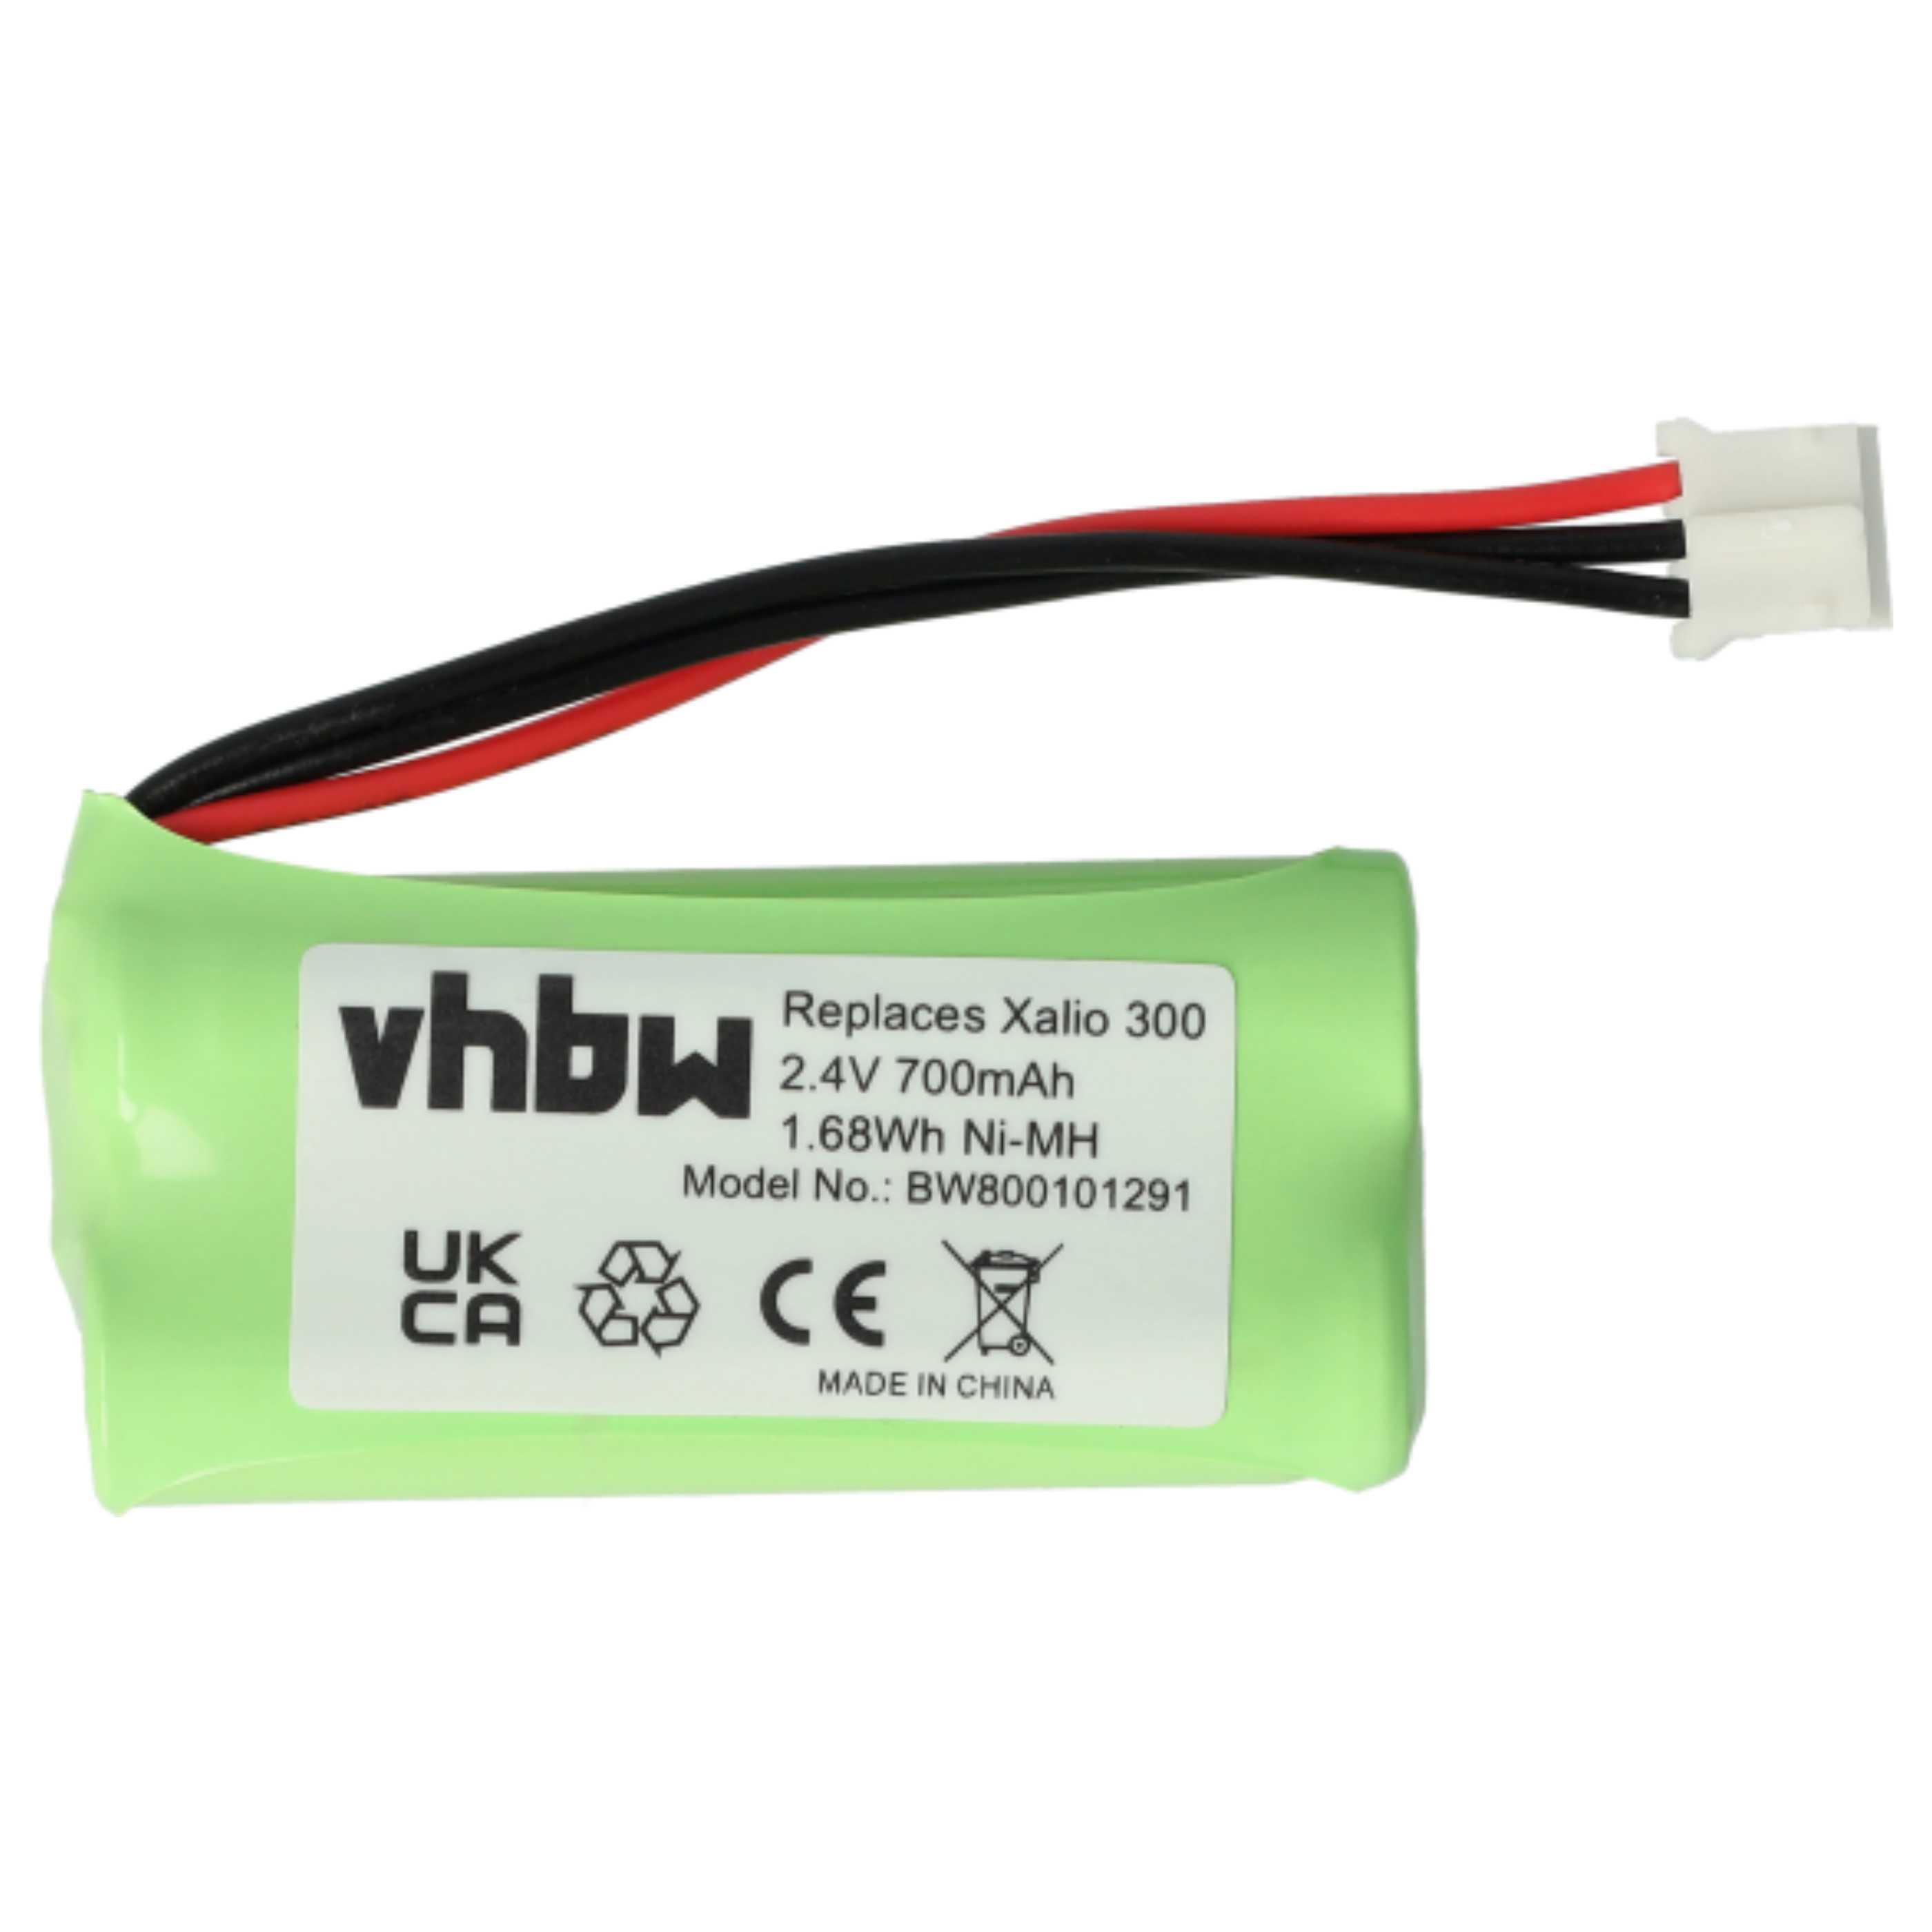 Landline Phone Battery Replacement for Philips 2HR-AAAU - 600mAh 2.4V NiMH